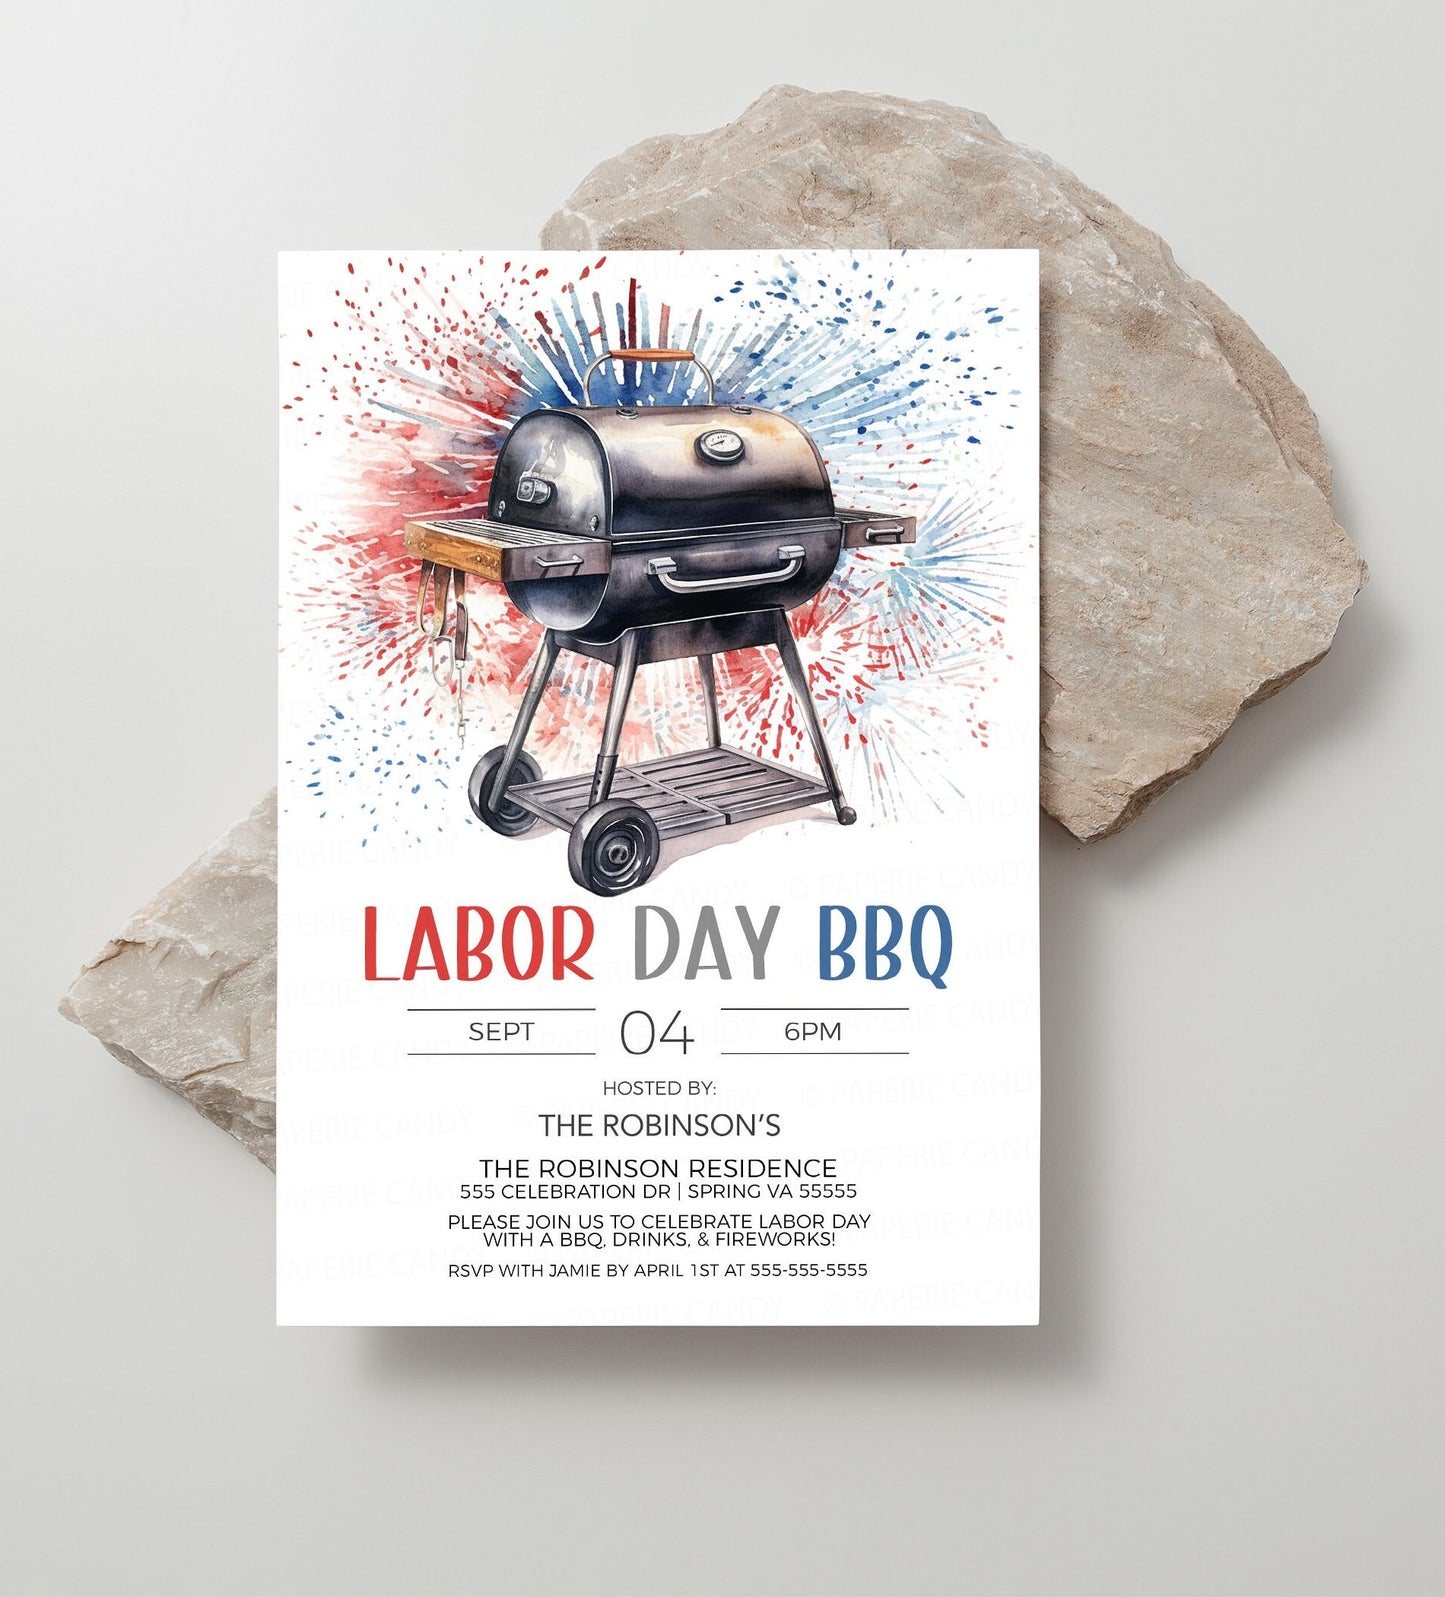 Labor Day BBQ Invitation, Labor Day BBQ Party Invite, Labor Day Cookout Fireworks, Memorial Day, 4th of July Veterans Day, Editable Template